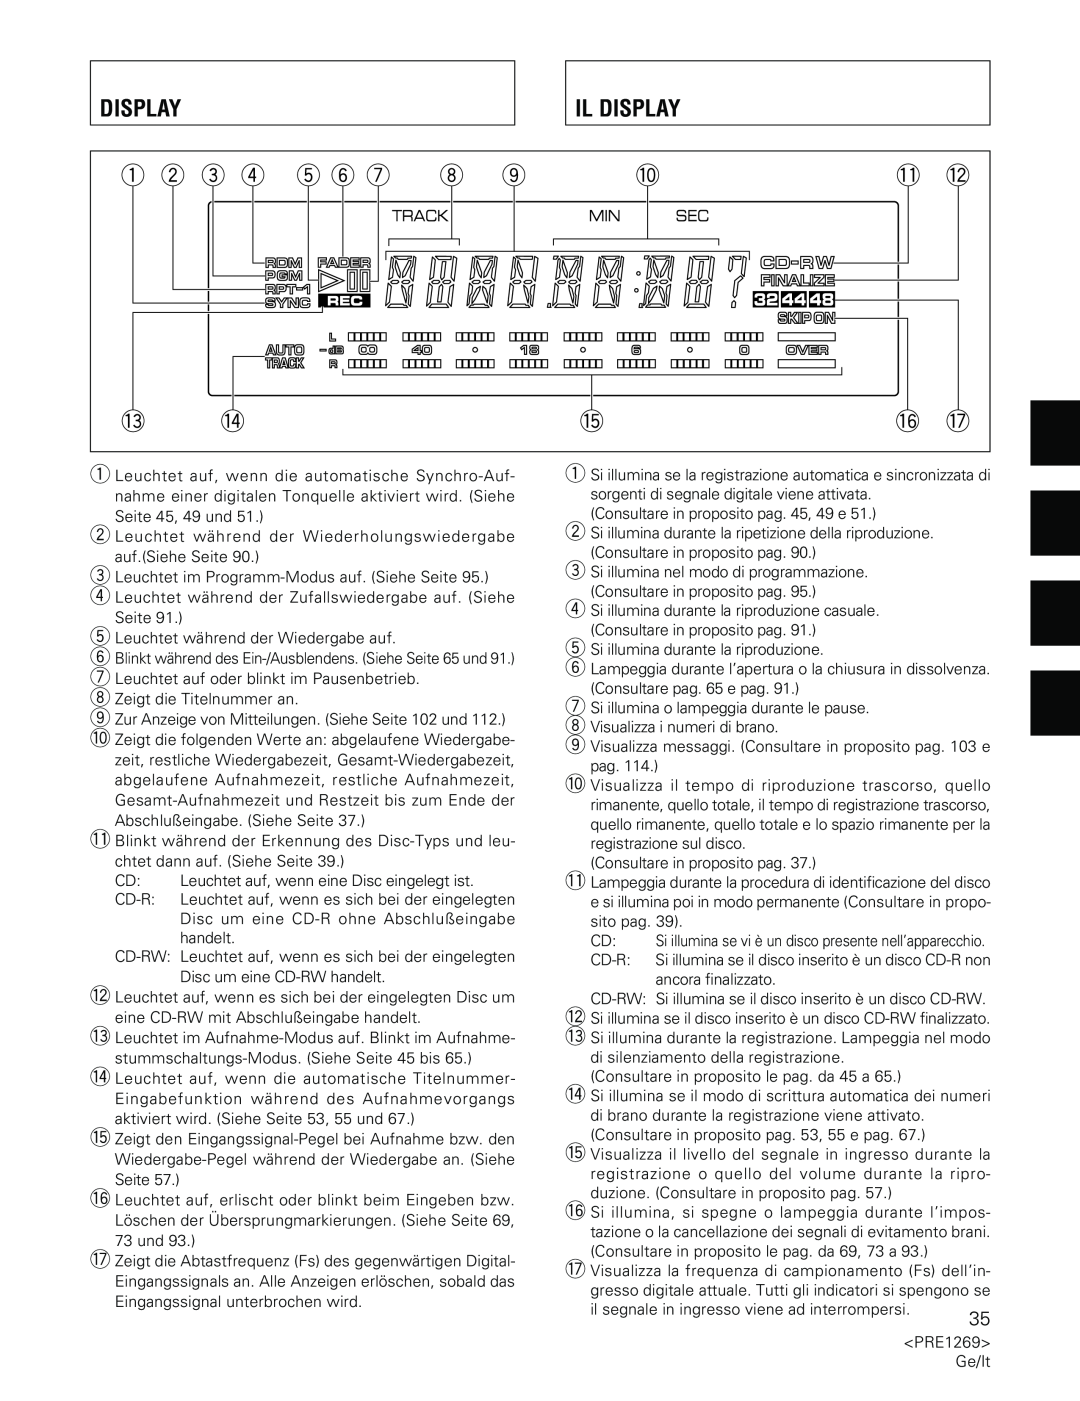 Pioneer PDR-555RW operating instructions Il Display 